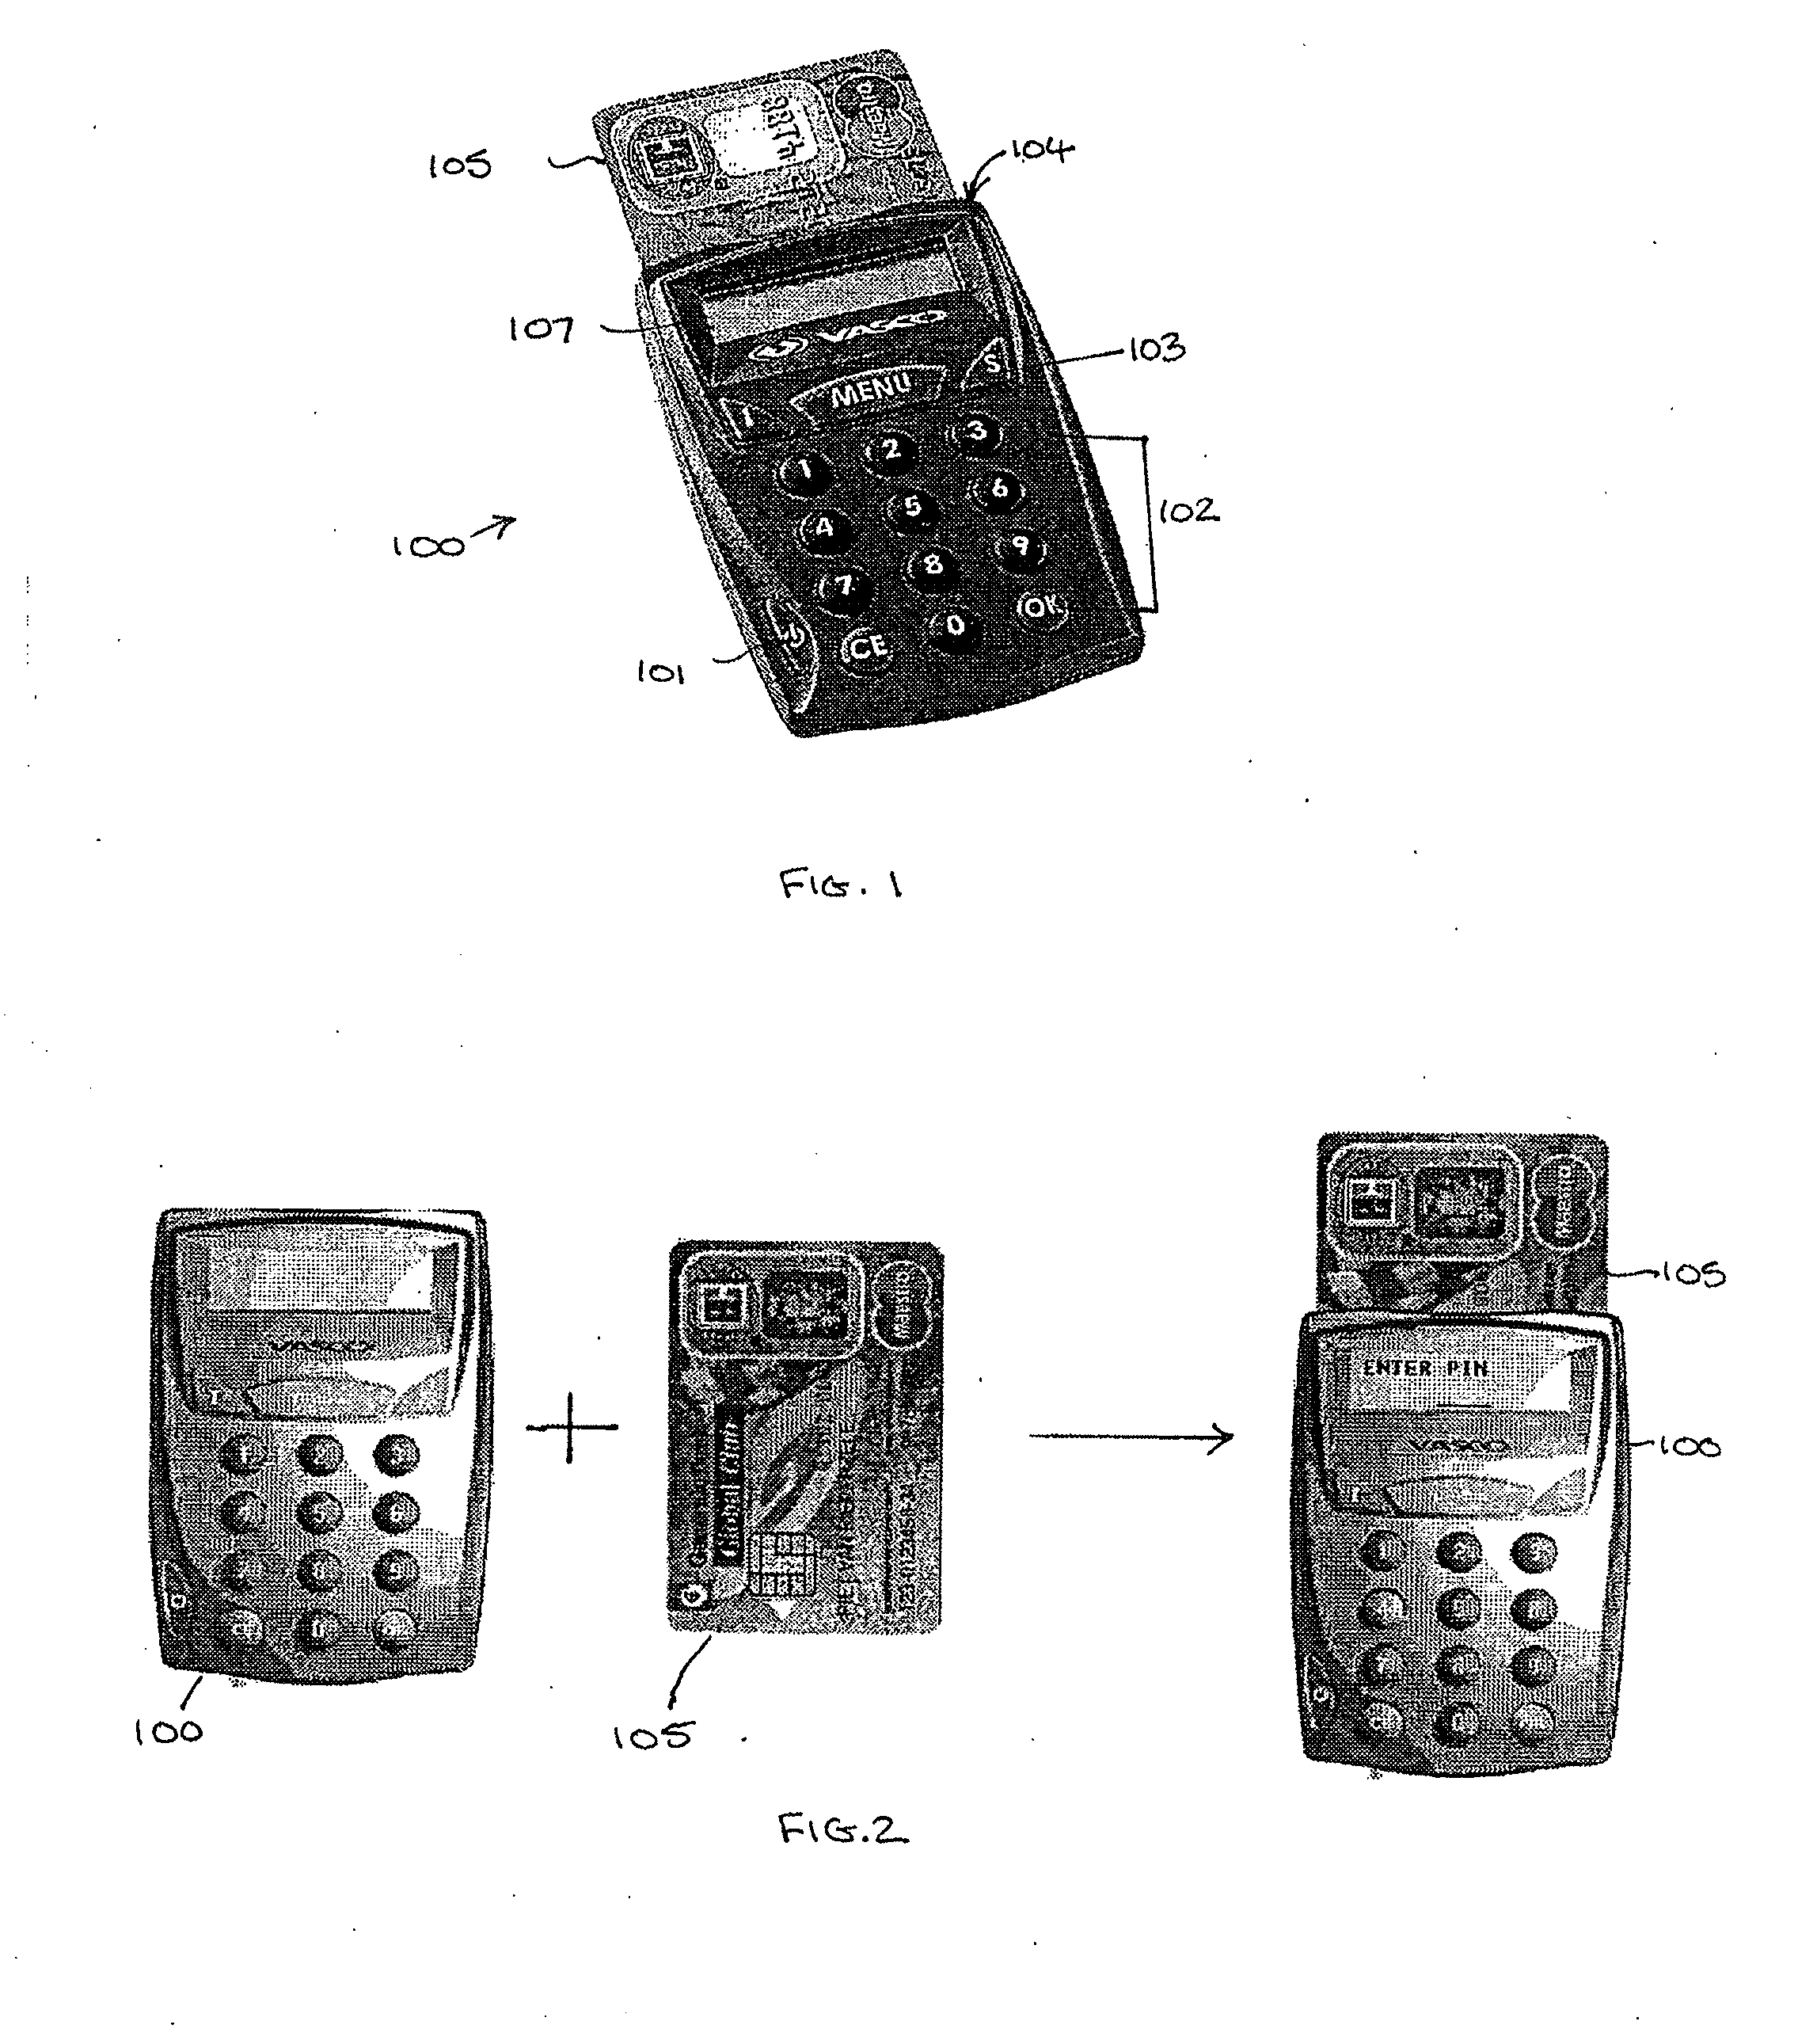 Field programmable smart card terminal and token device